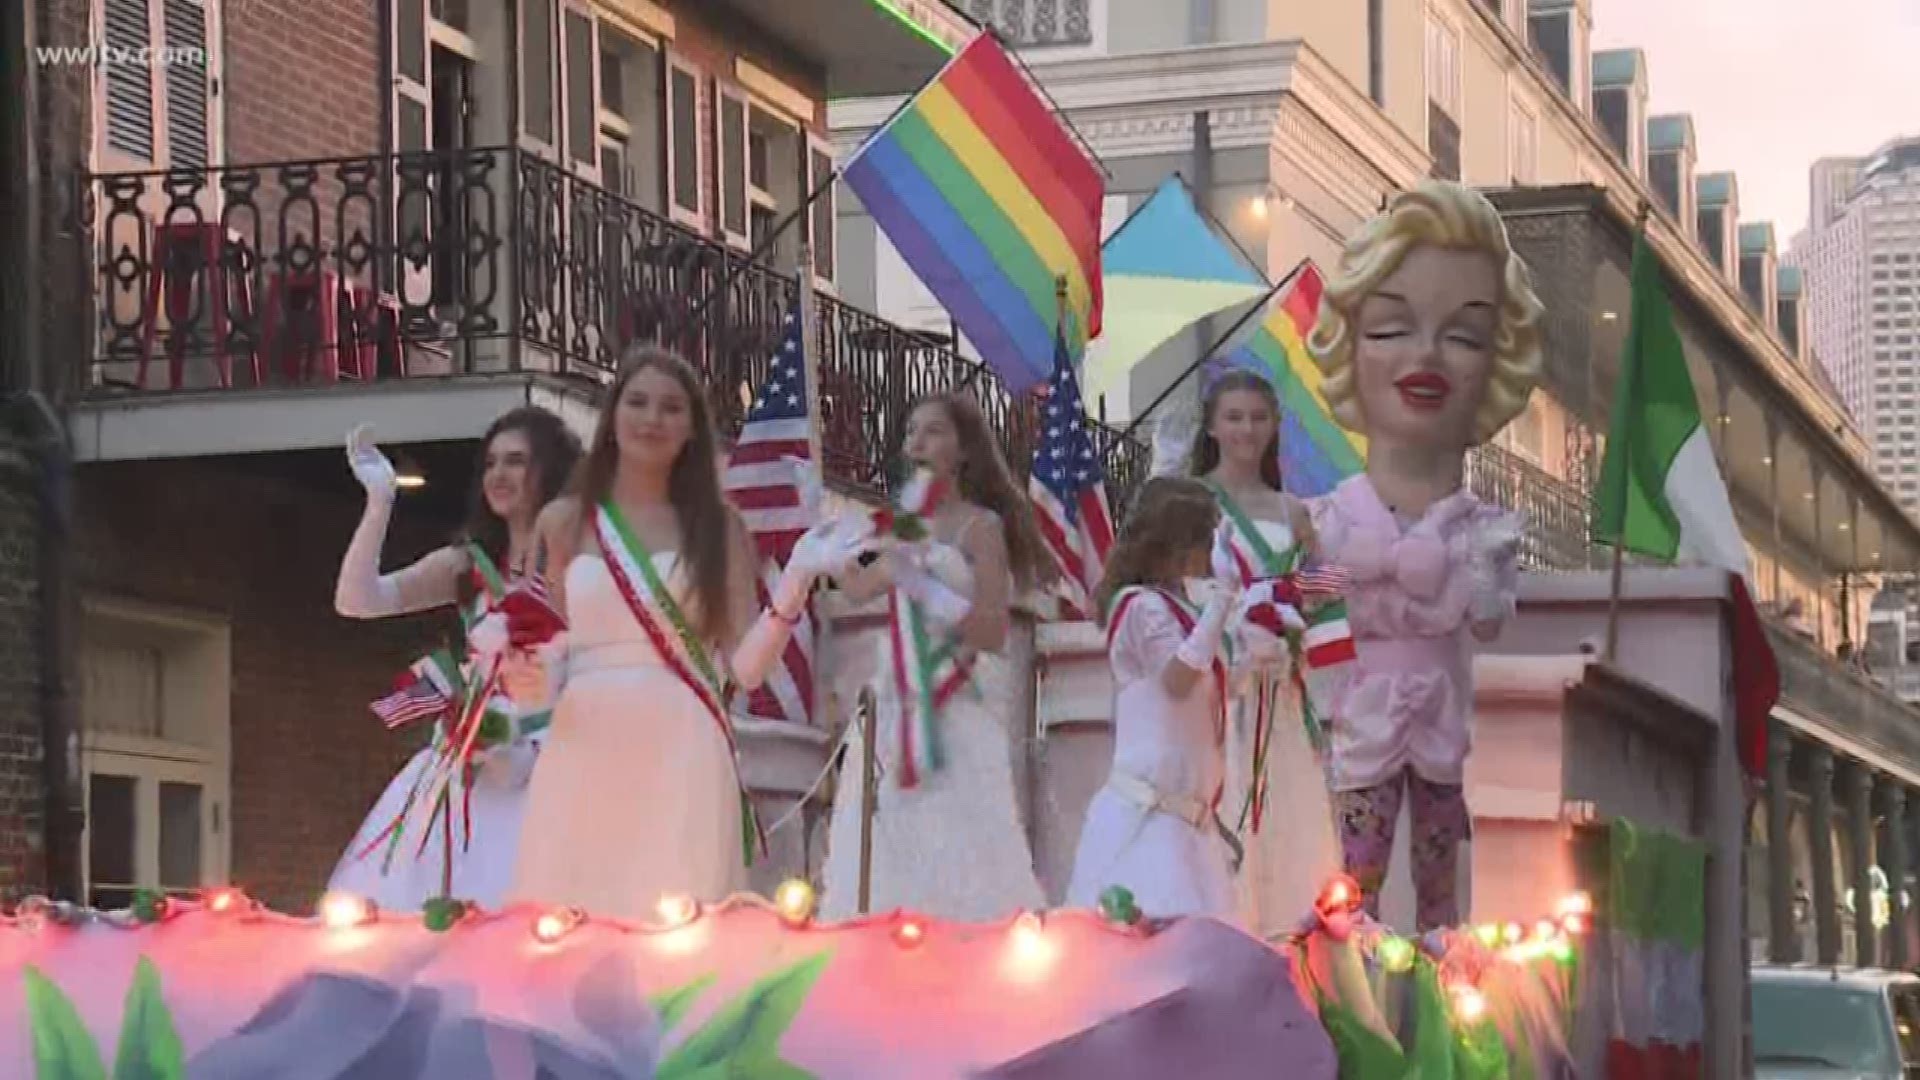 The annual St. Joseph's Day parade organized by the Italian-American St. Joseph Society rolled Saturday, March 23 through the French Quarter.